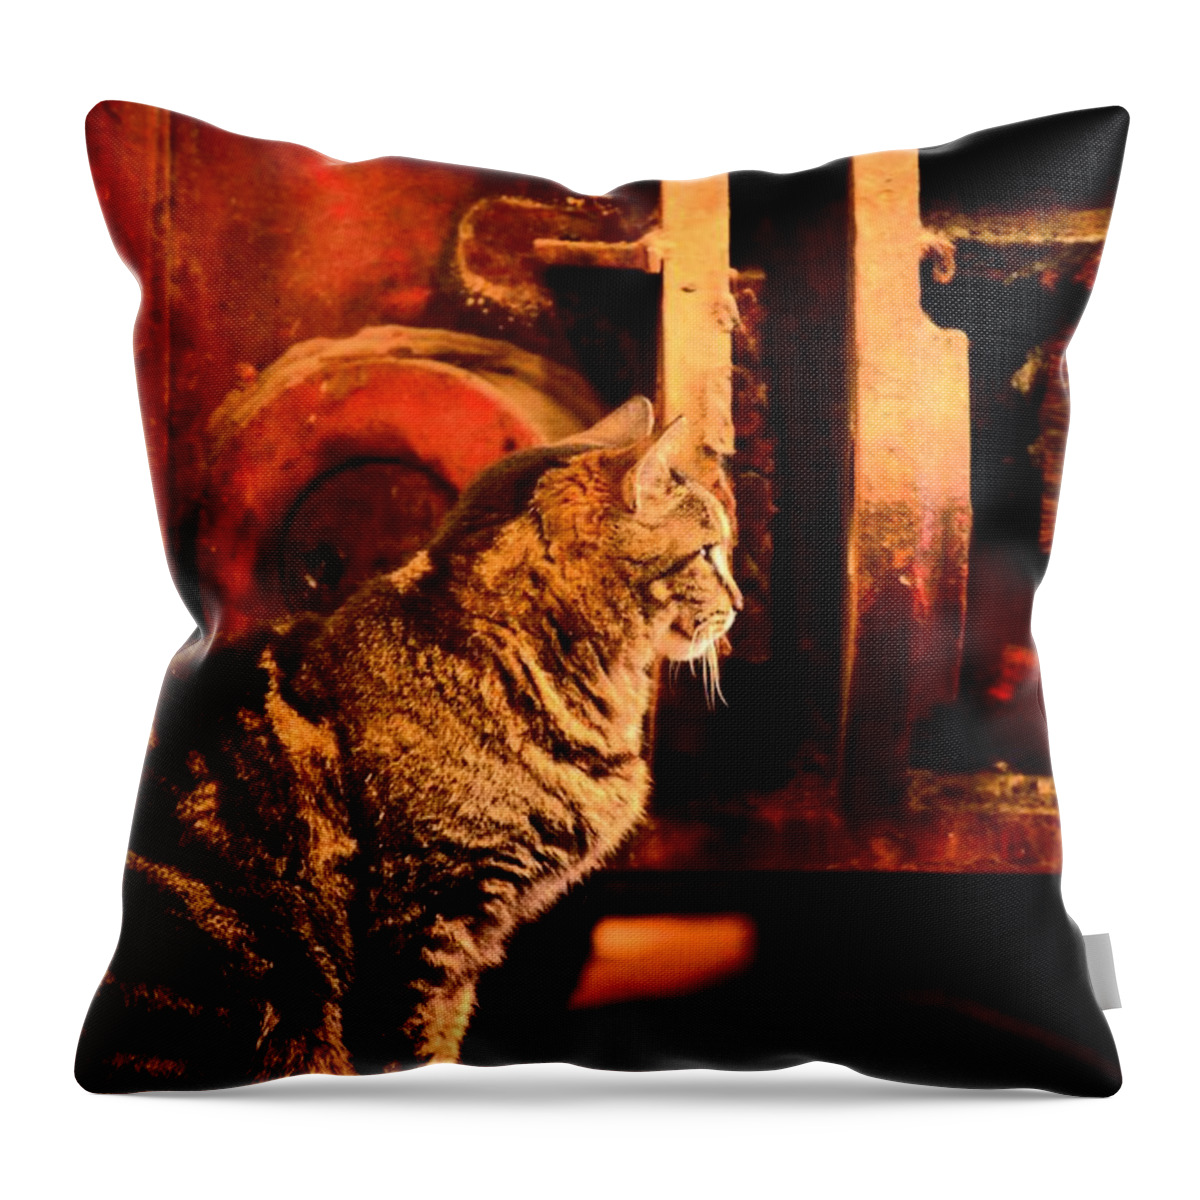 The Crane Yard Cat Throw Pillow featuring the photograph The Crane Yard Cat by Maria Urso